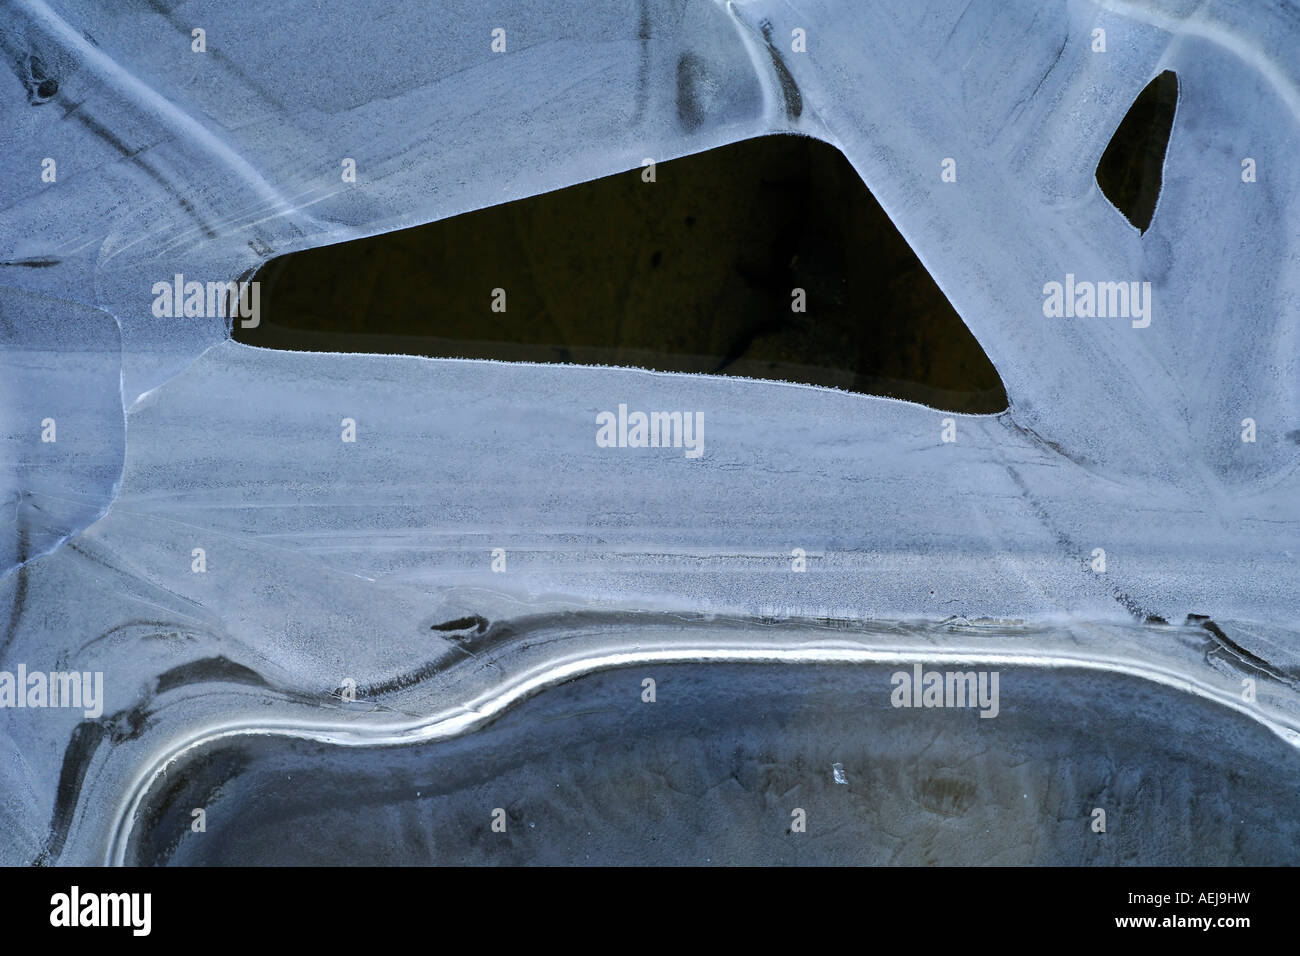 Art in nature, thin ice cap on a puddle Stock Photo